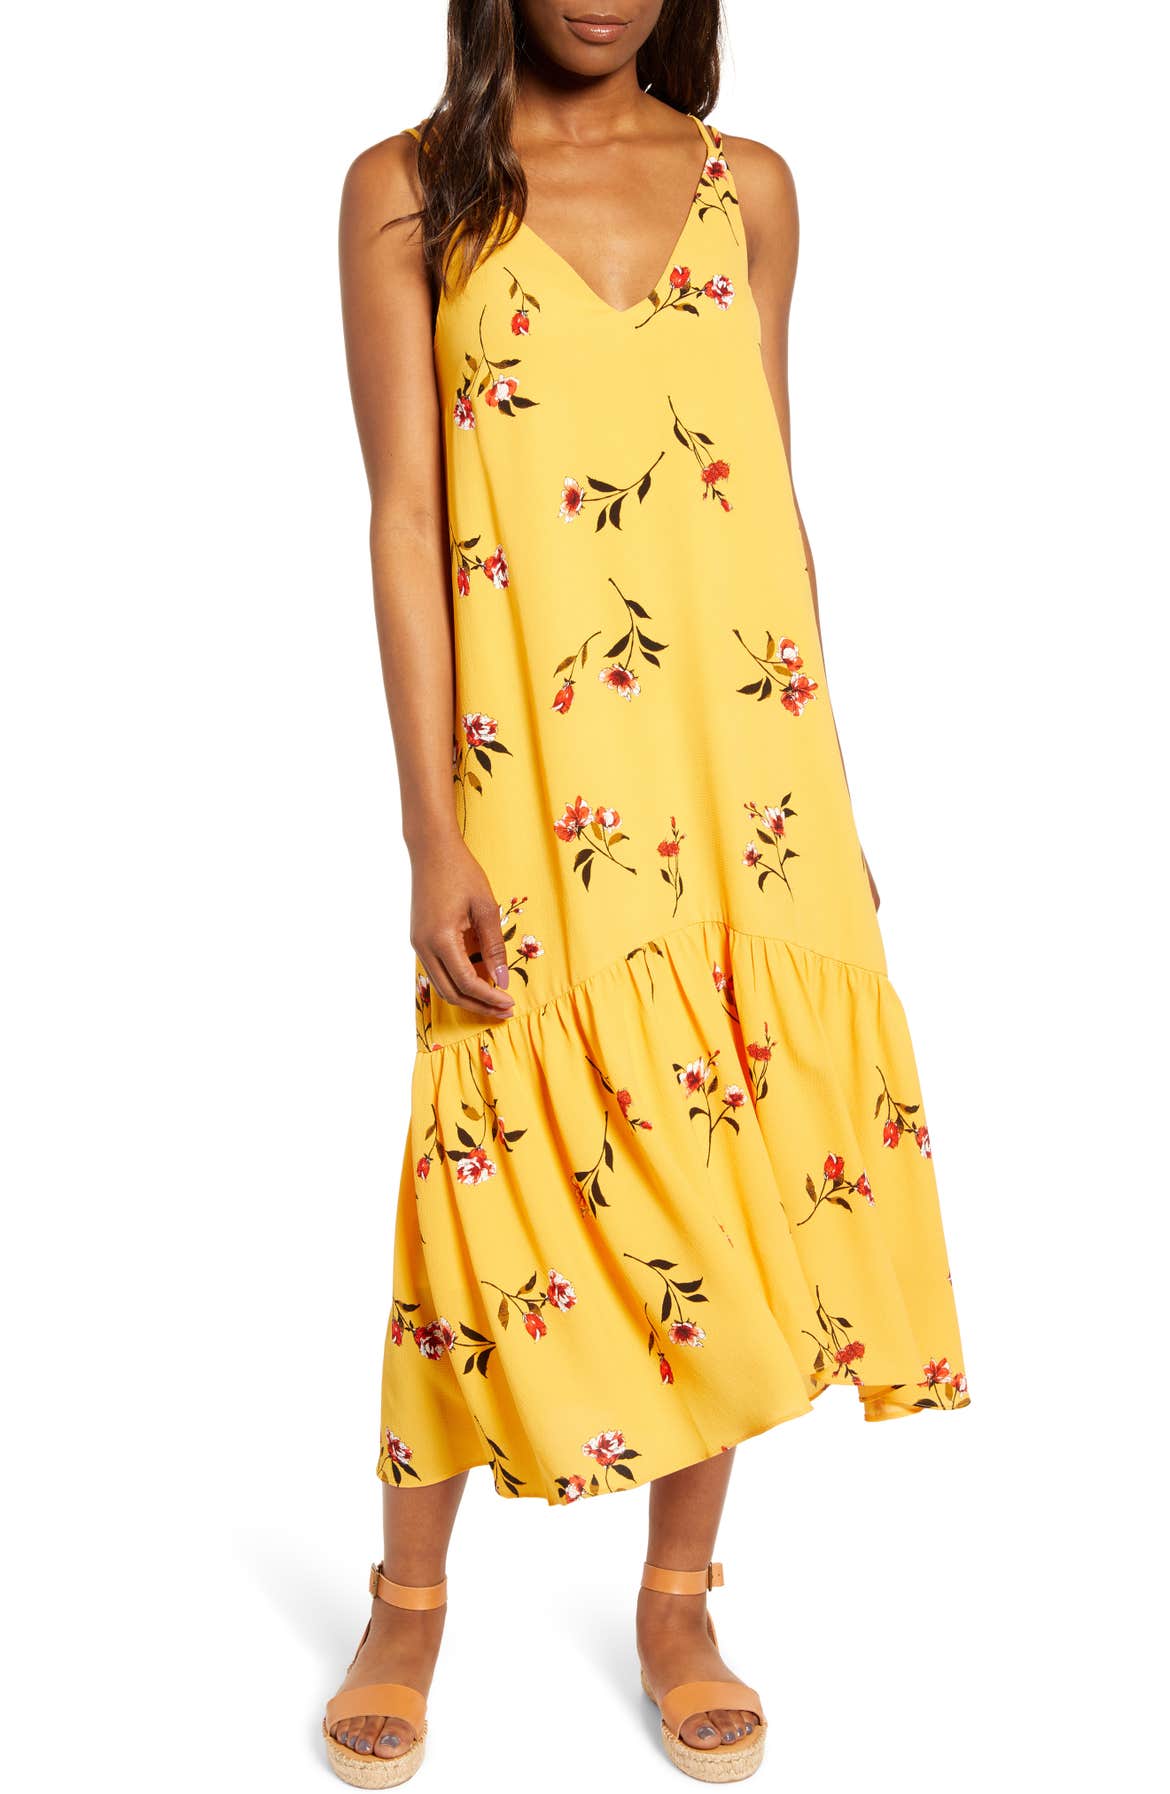 15 sundresses perfect for post-Memorial Day fun - Good Morning America